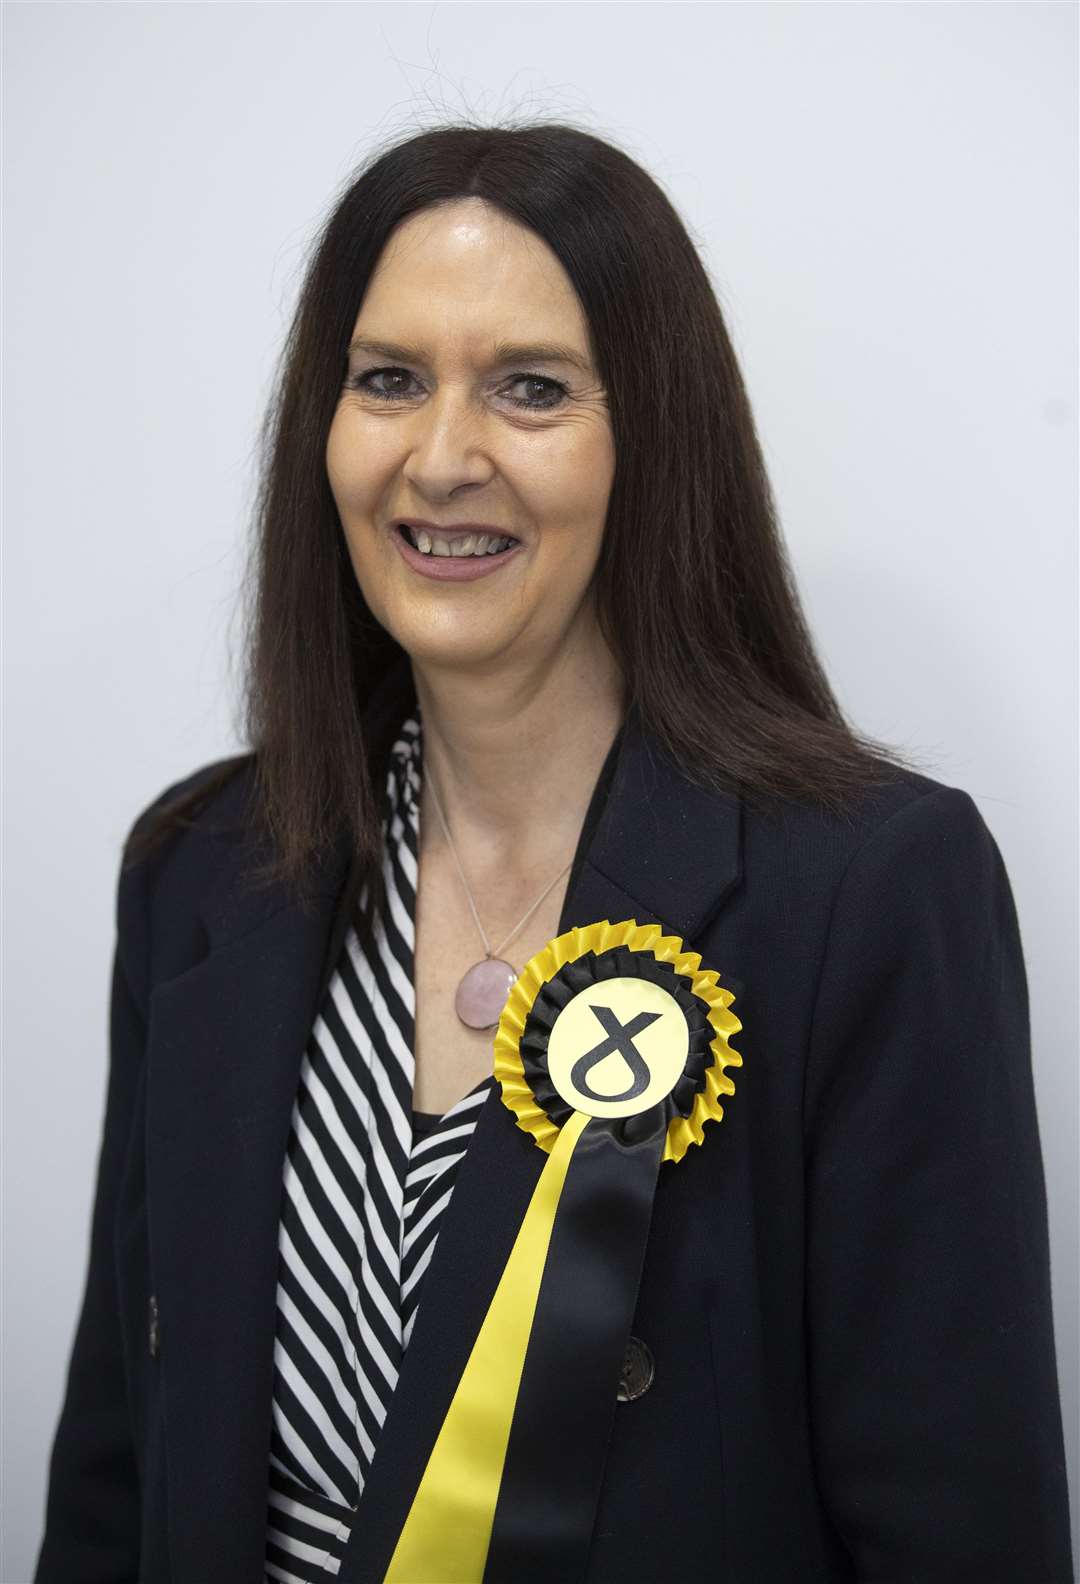 SNP MP Margaret Ferrier has apologised for travelling to London when she should have been self-isolating (Jane Barlow/PA)